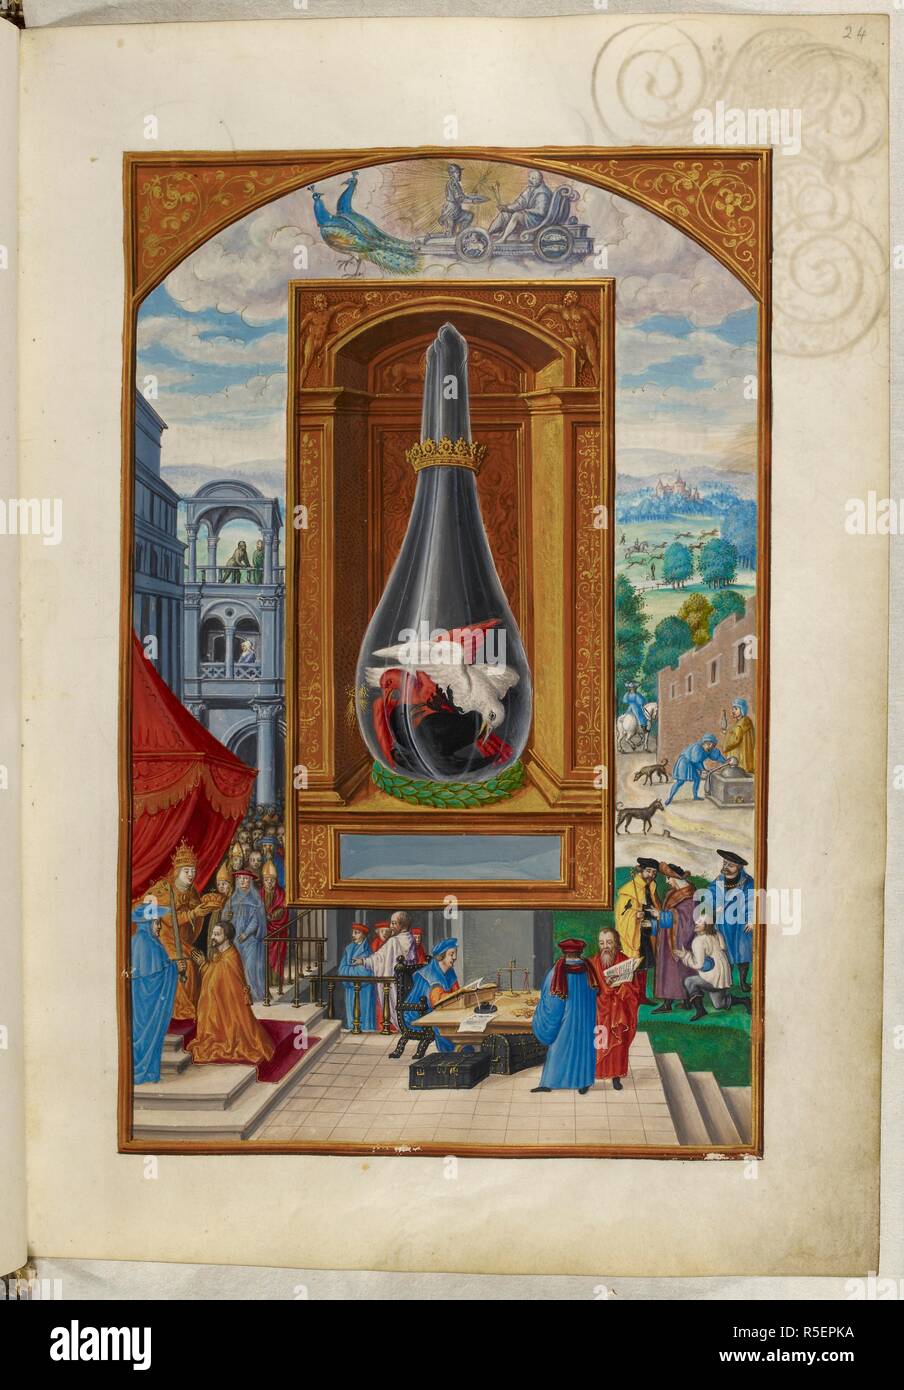 Illustration of the Fourth Treatise: three birds fighting in a glass  vessel; outside the niche, the Pope bestows a crown and money is counted. Splendor  Solis. Germany, 1582. (Whole folio) Illustration of